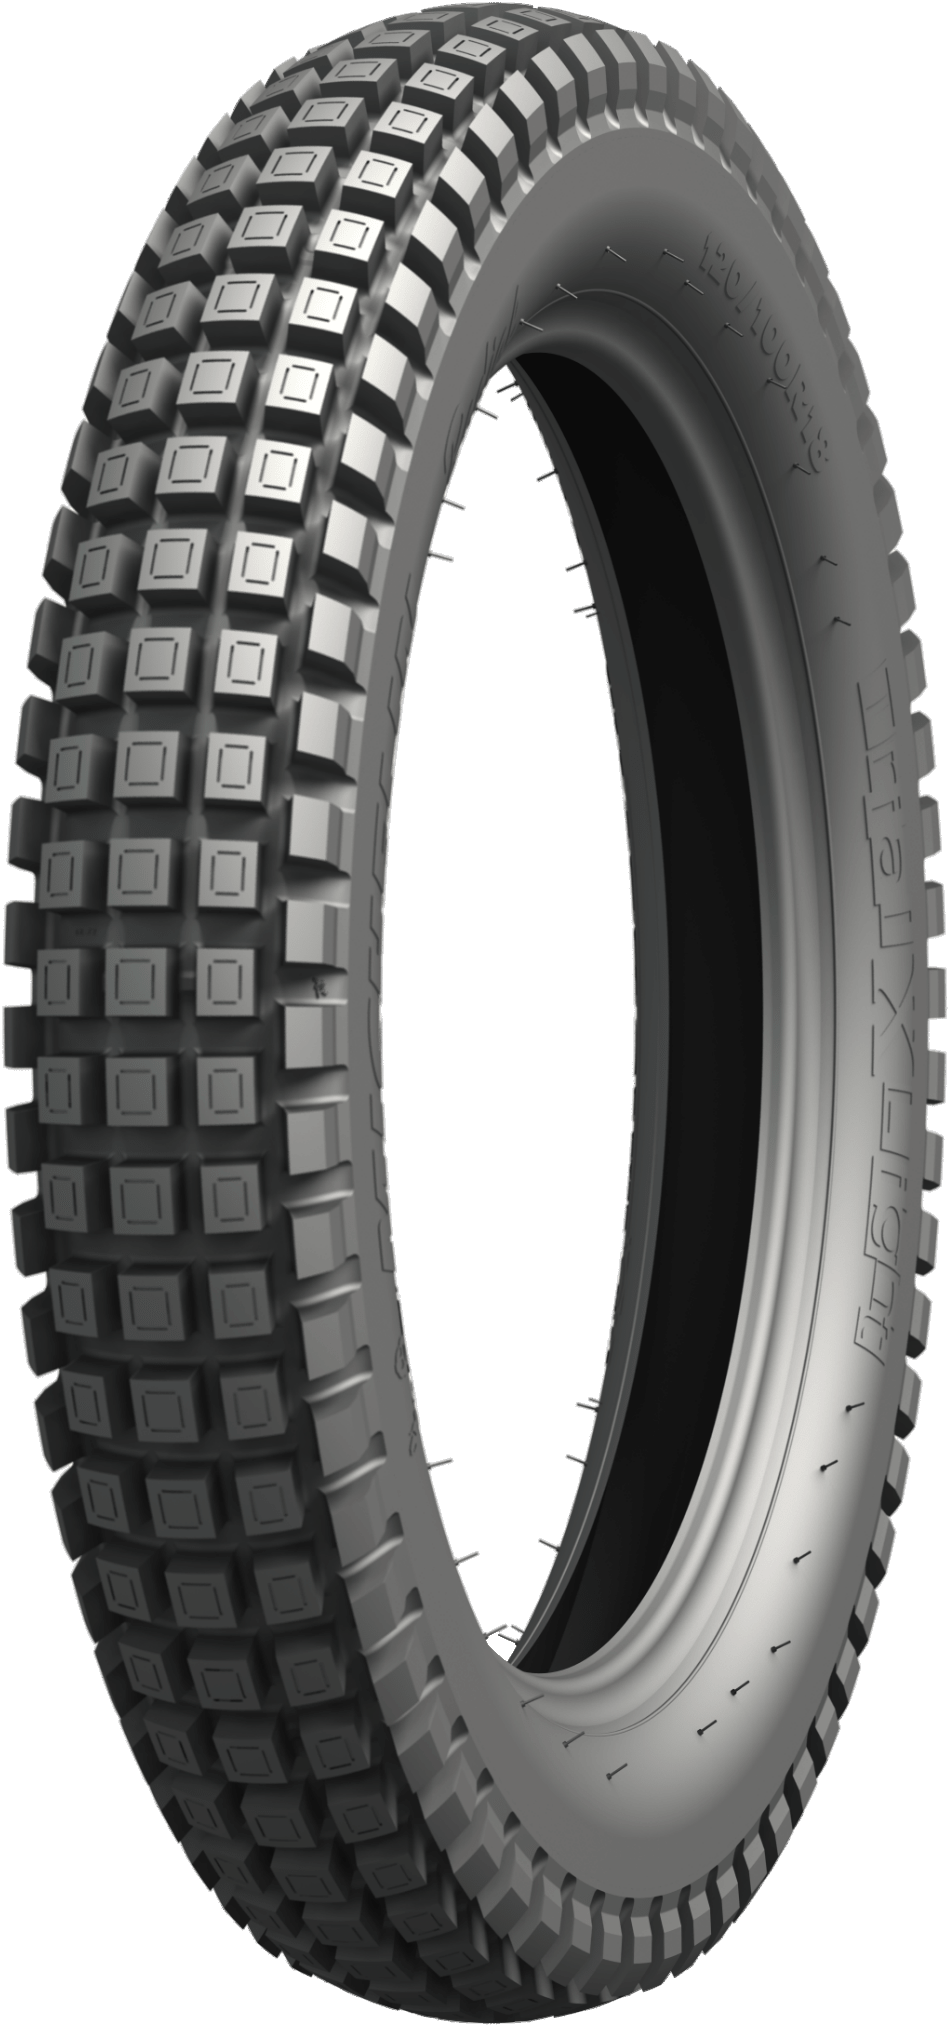 Ендуро гуми MICHELIN Trial X Light Competition 120/100 R18 68M